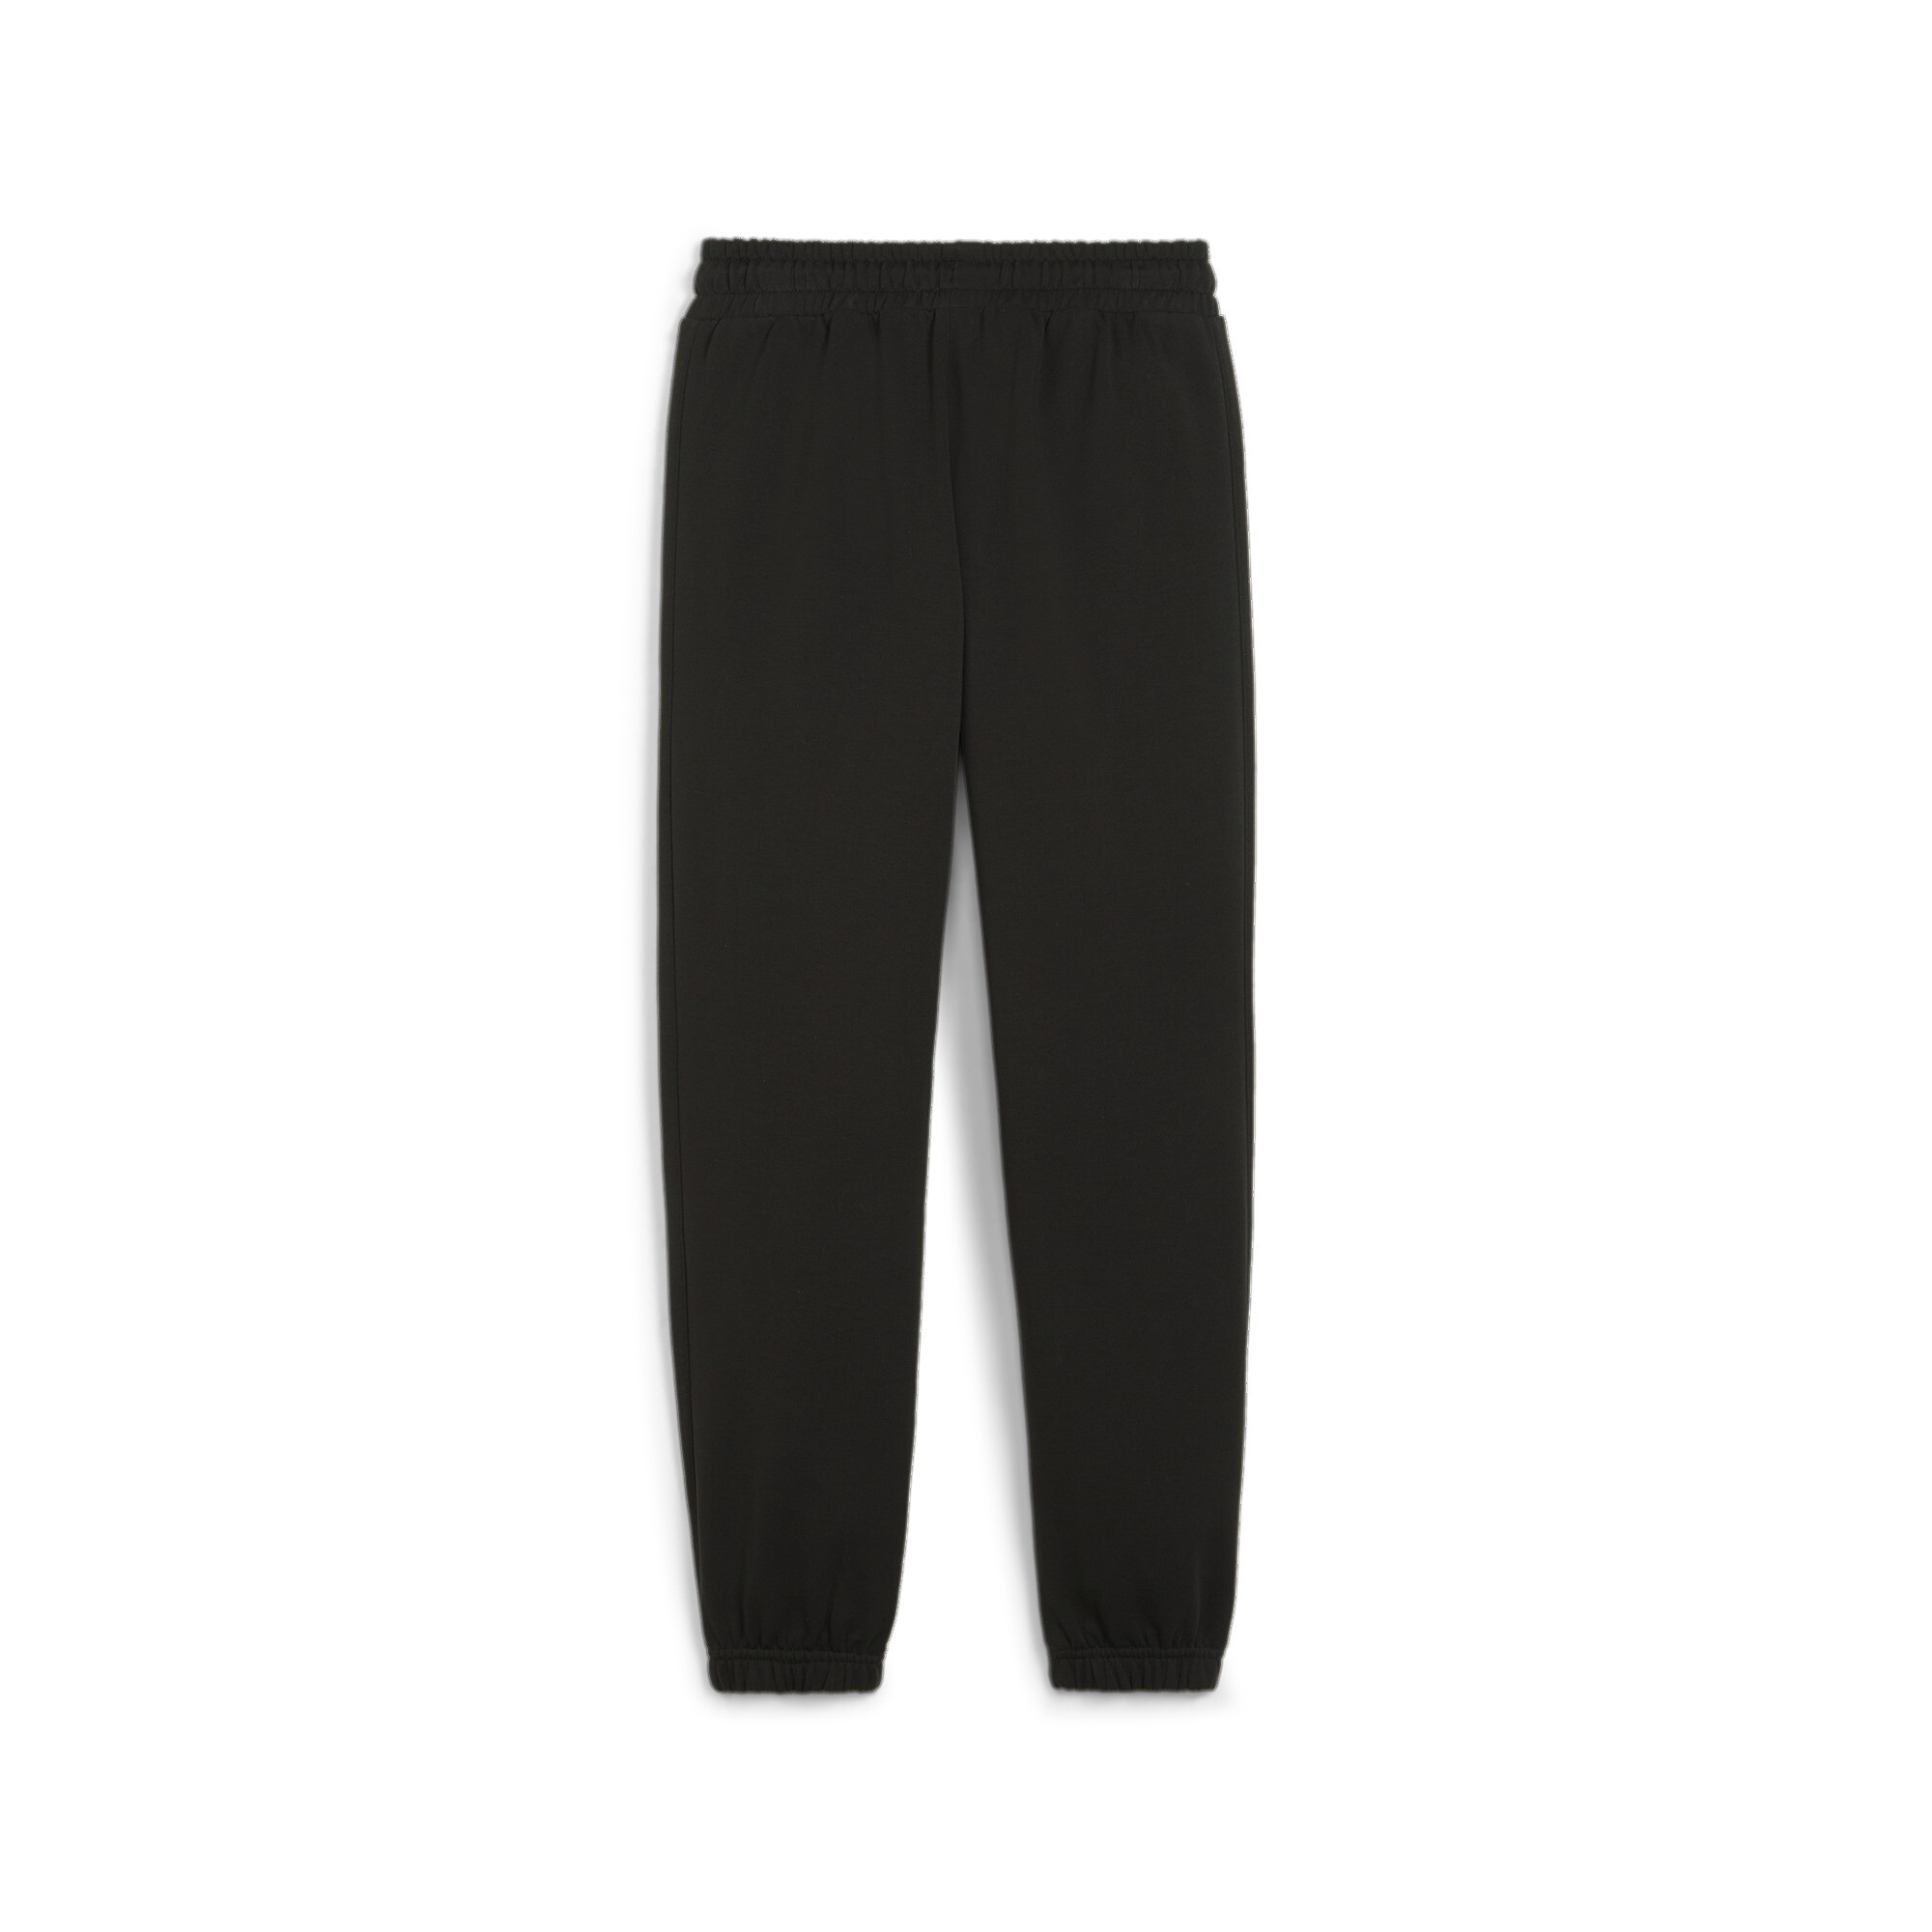 PUMA FOR THE FANBASE Sweatpants In Black, Size 9-10 Youth